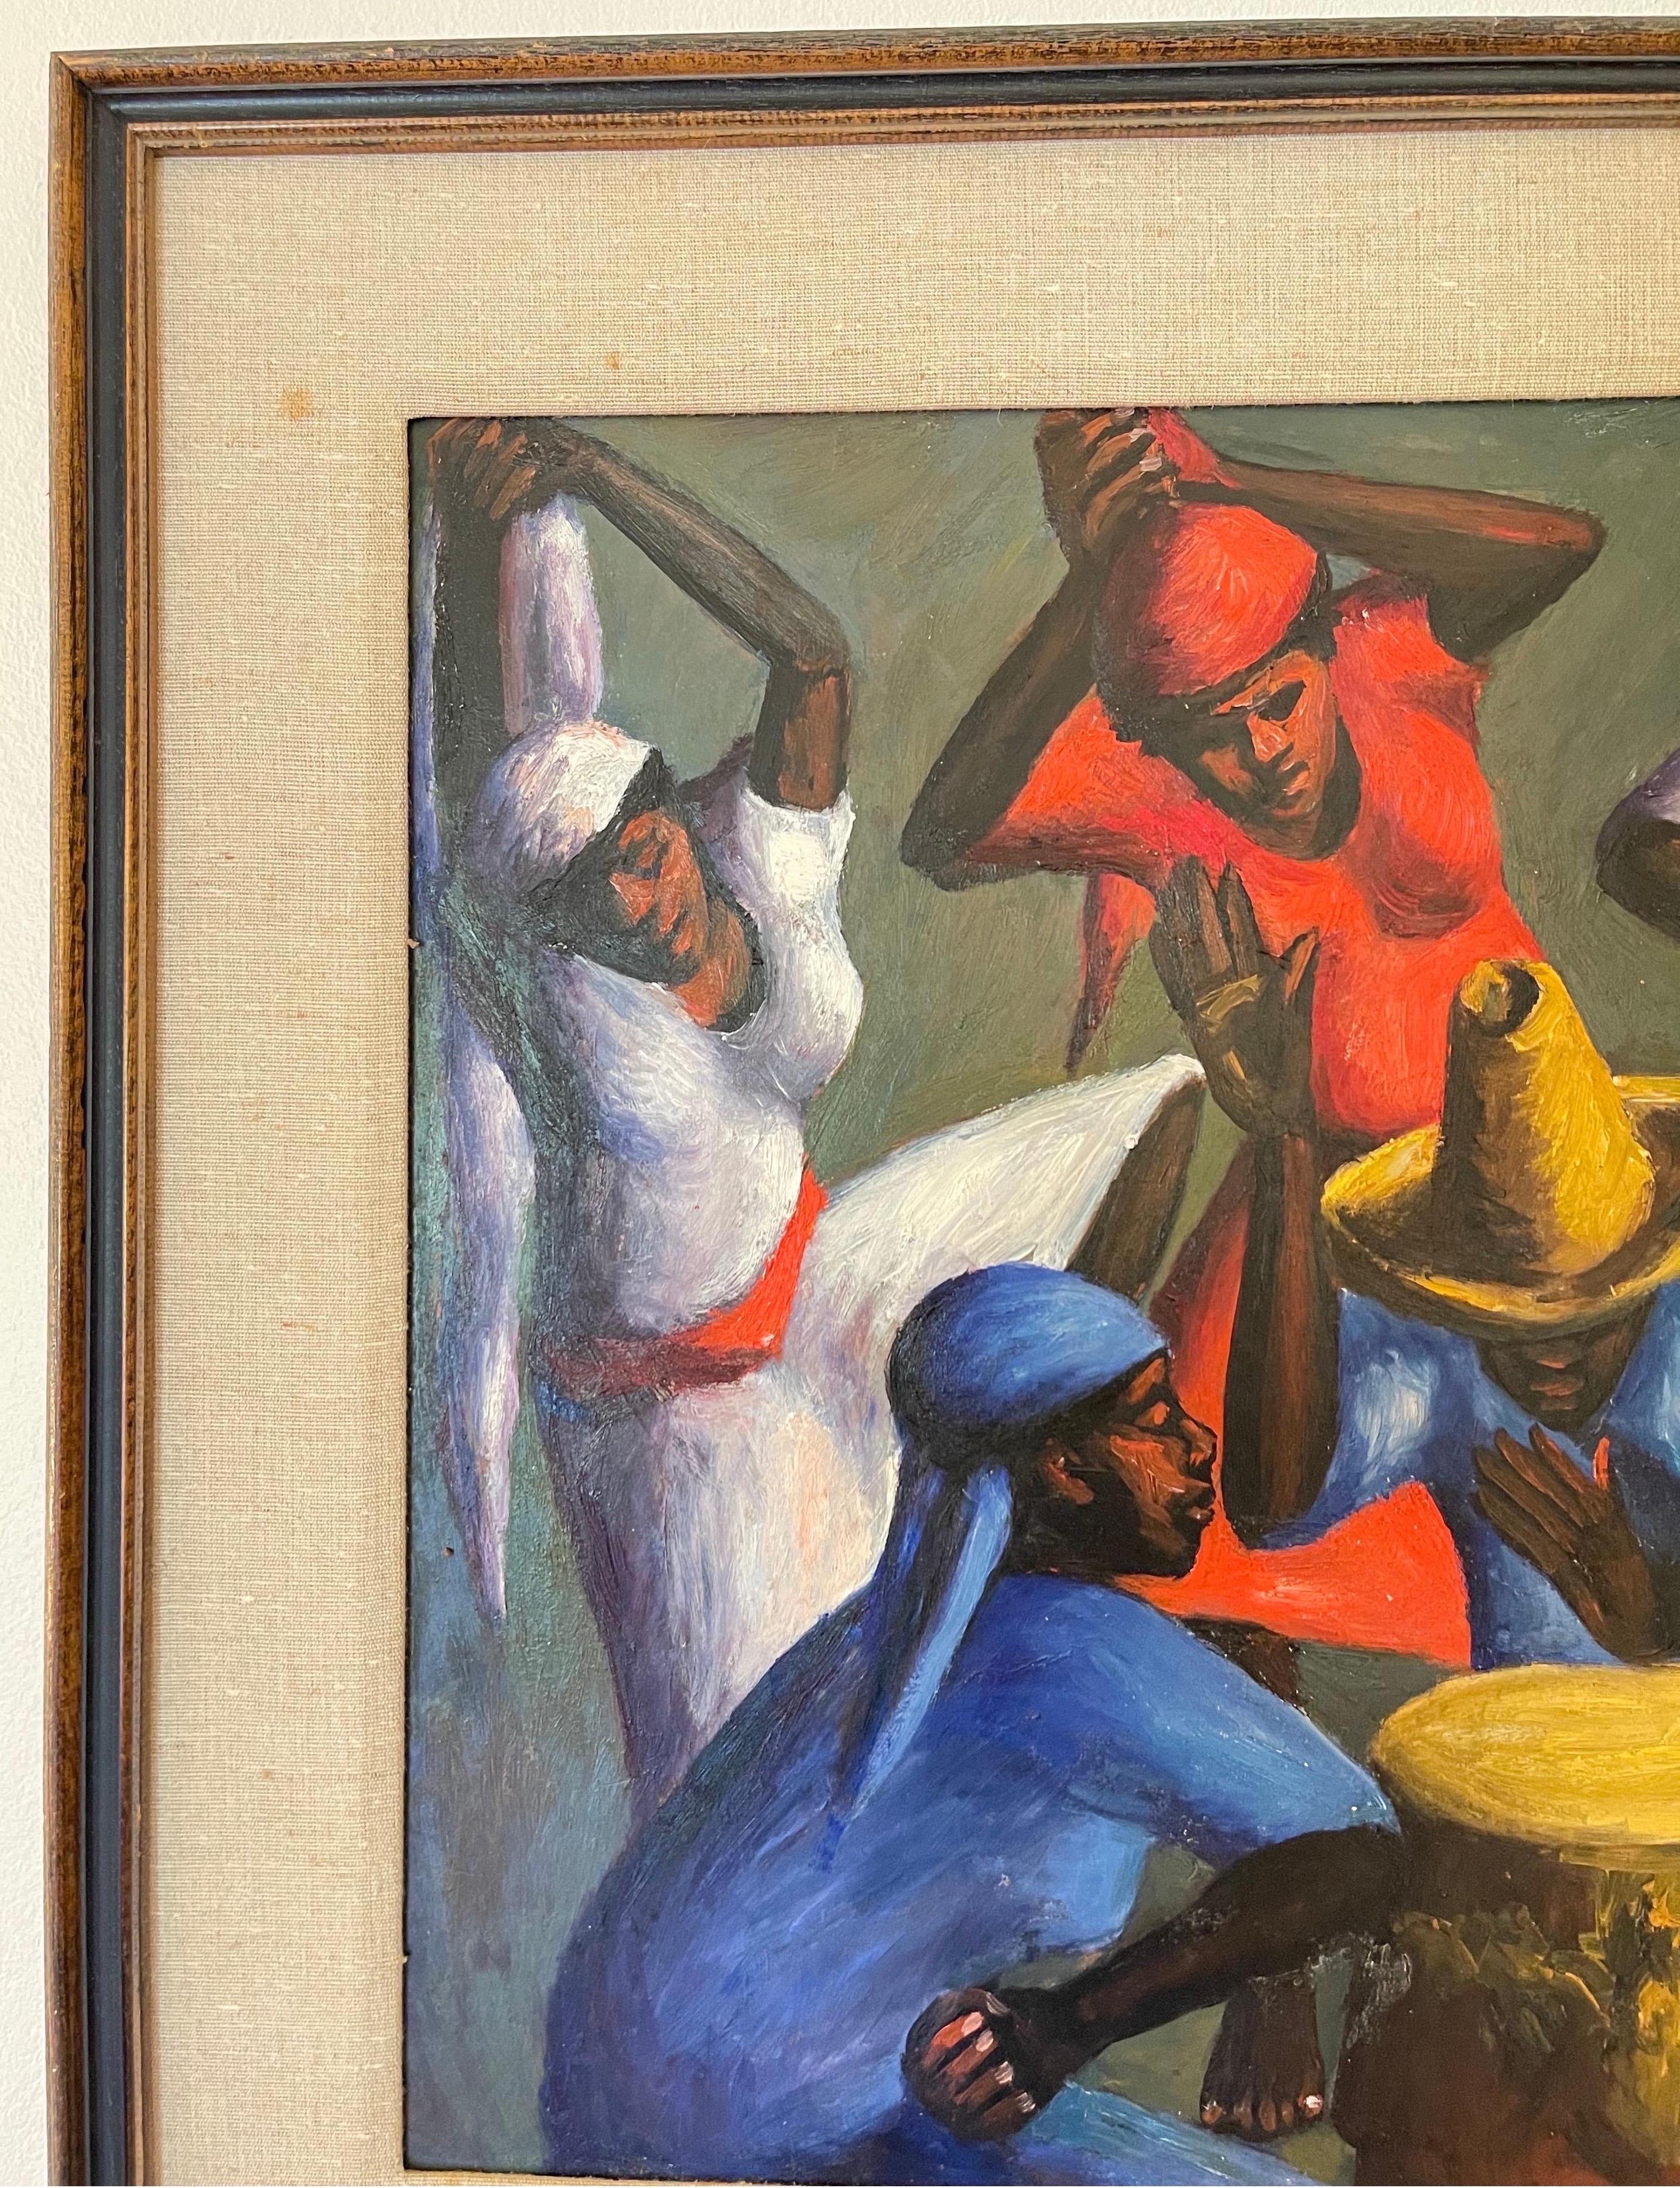 Tribal 1956 Haiti Drummers and Dancers by Xaviar Amiana Painting For Sale